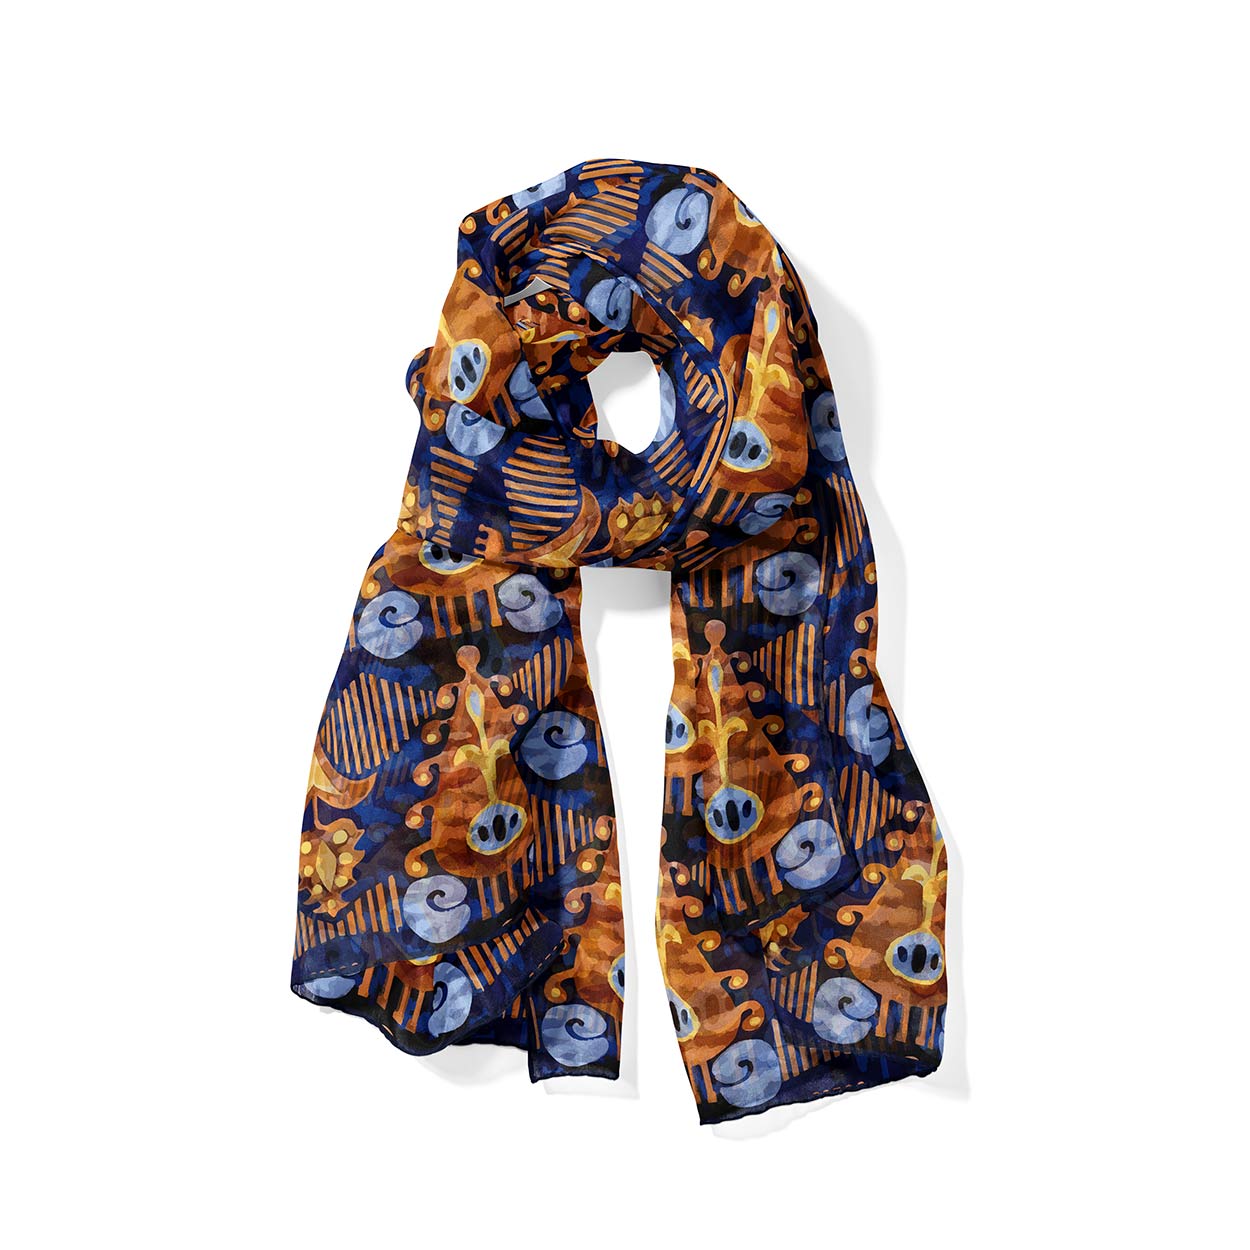 Blue and brown neck silk scarf for men's and women's